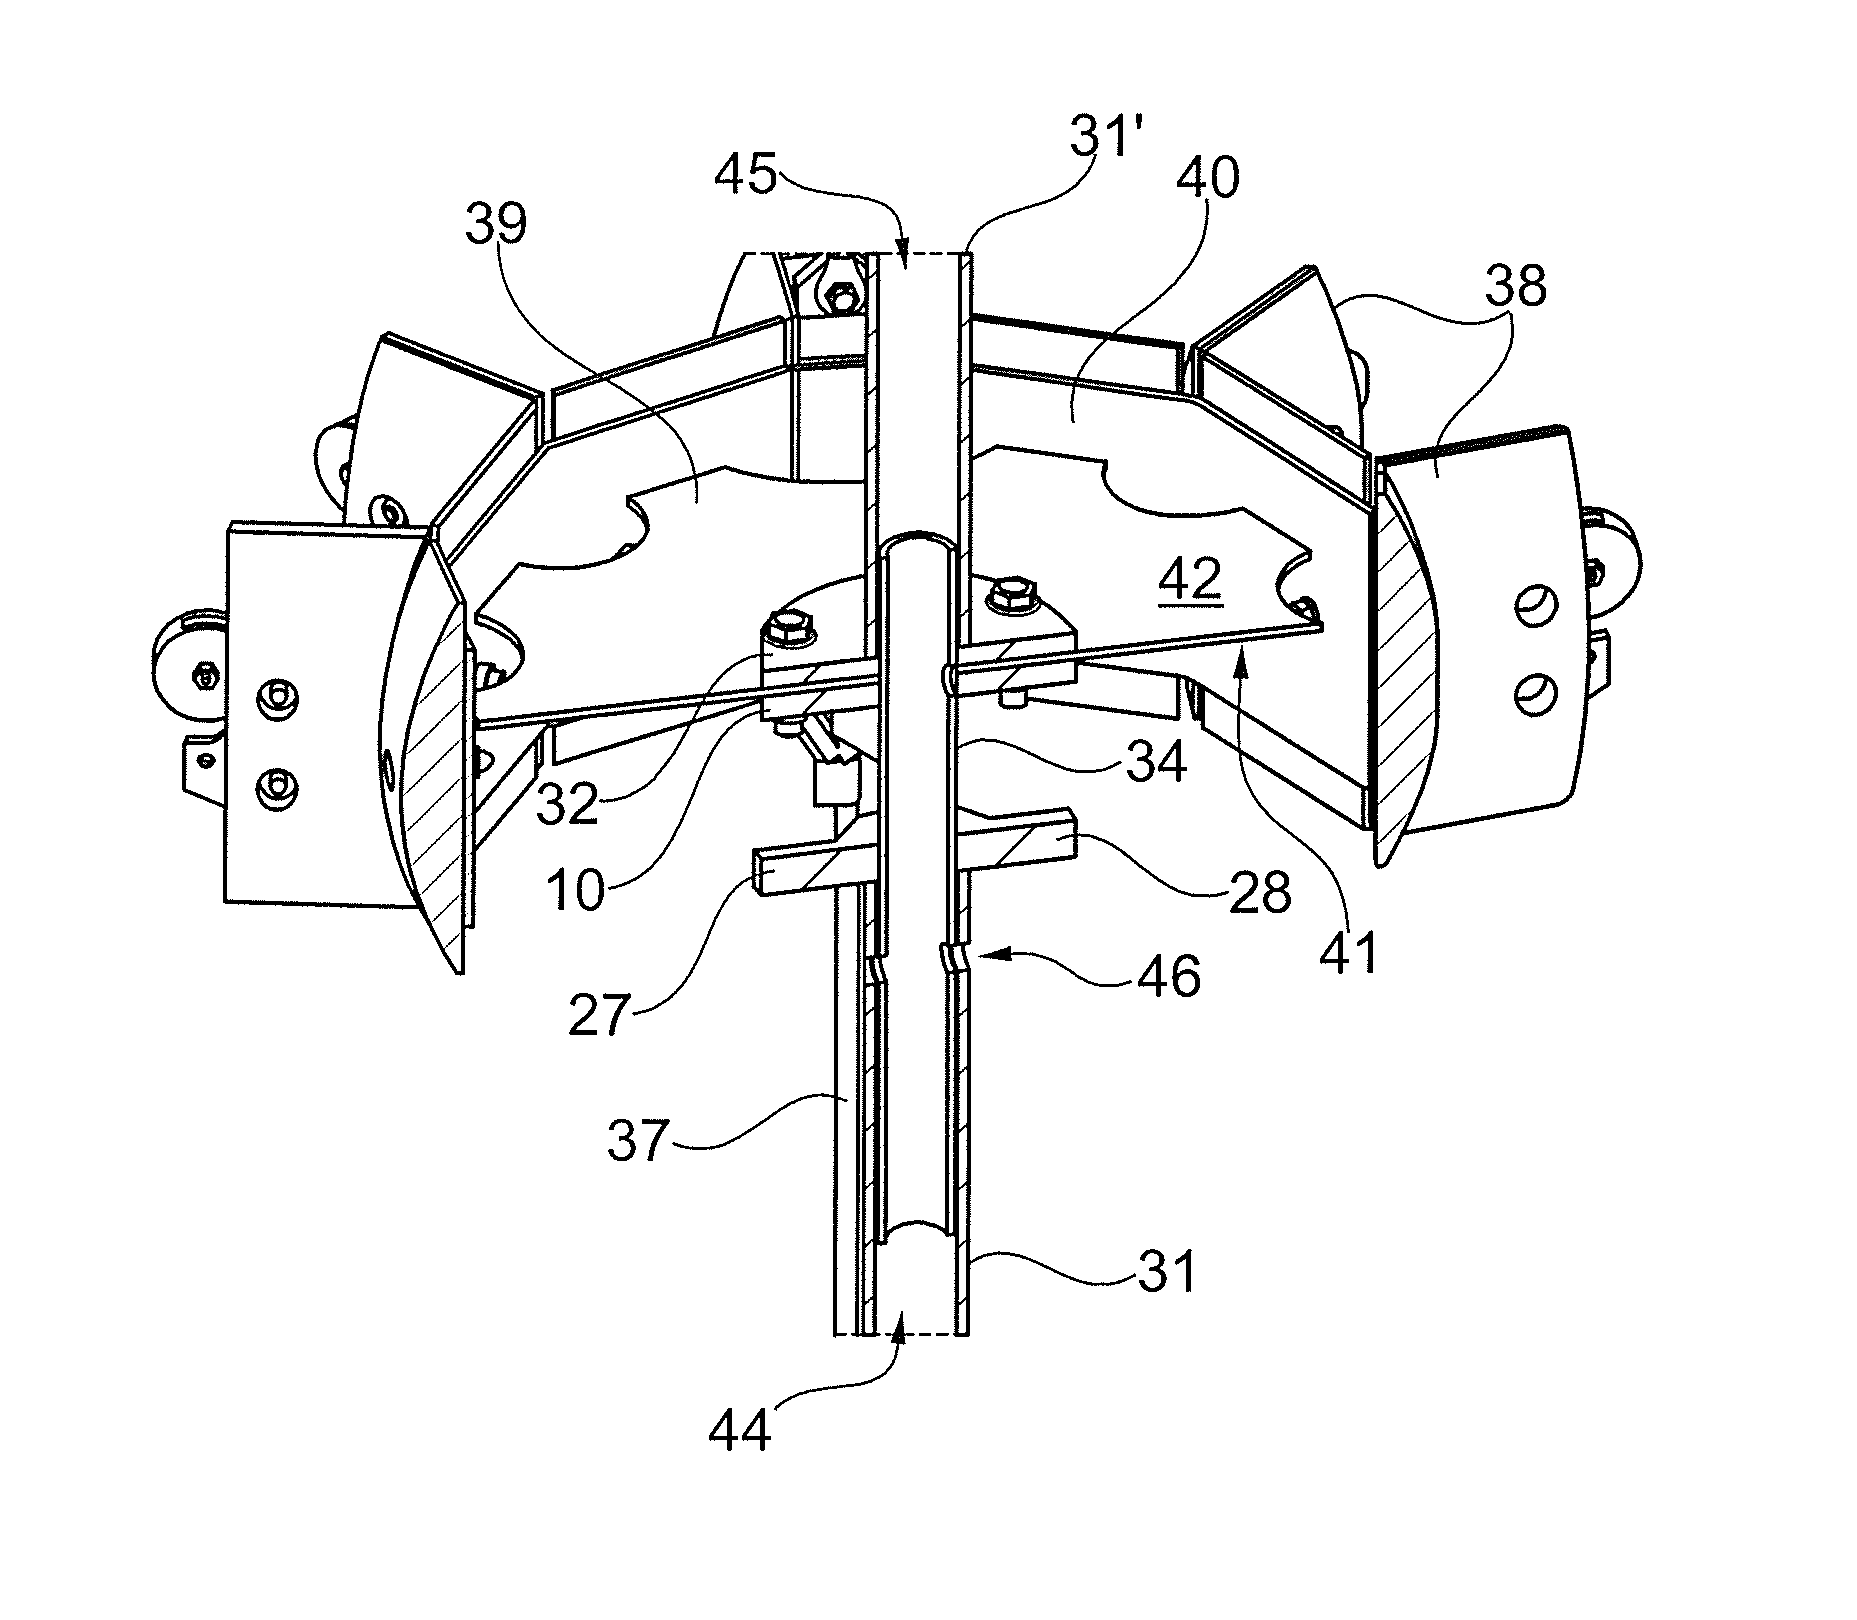 Unit for rotating cable spacing plates in a wind turbine tower